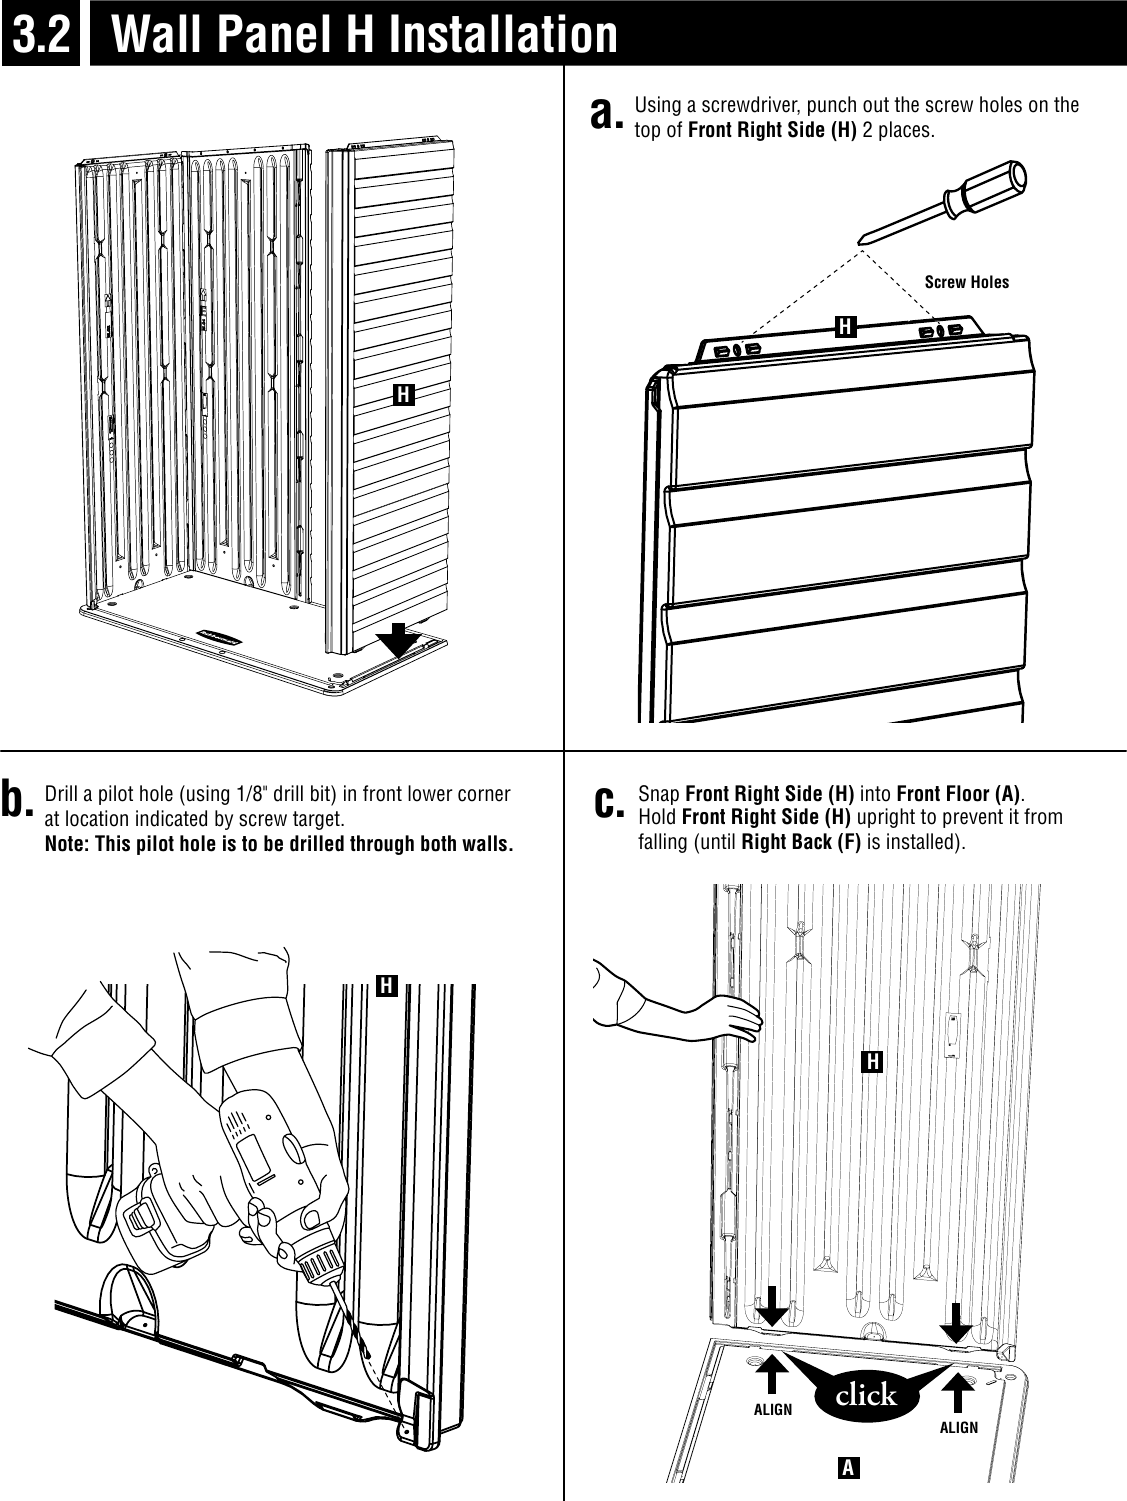 Page 7 of 12 - Rubbermaid Rubbermaid-Outdoor-Storage-5L10-Users-Manual- 5L10 Assembly Instructions English  Rubbermaid-outdoor-storage-5l10-users-manual